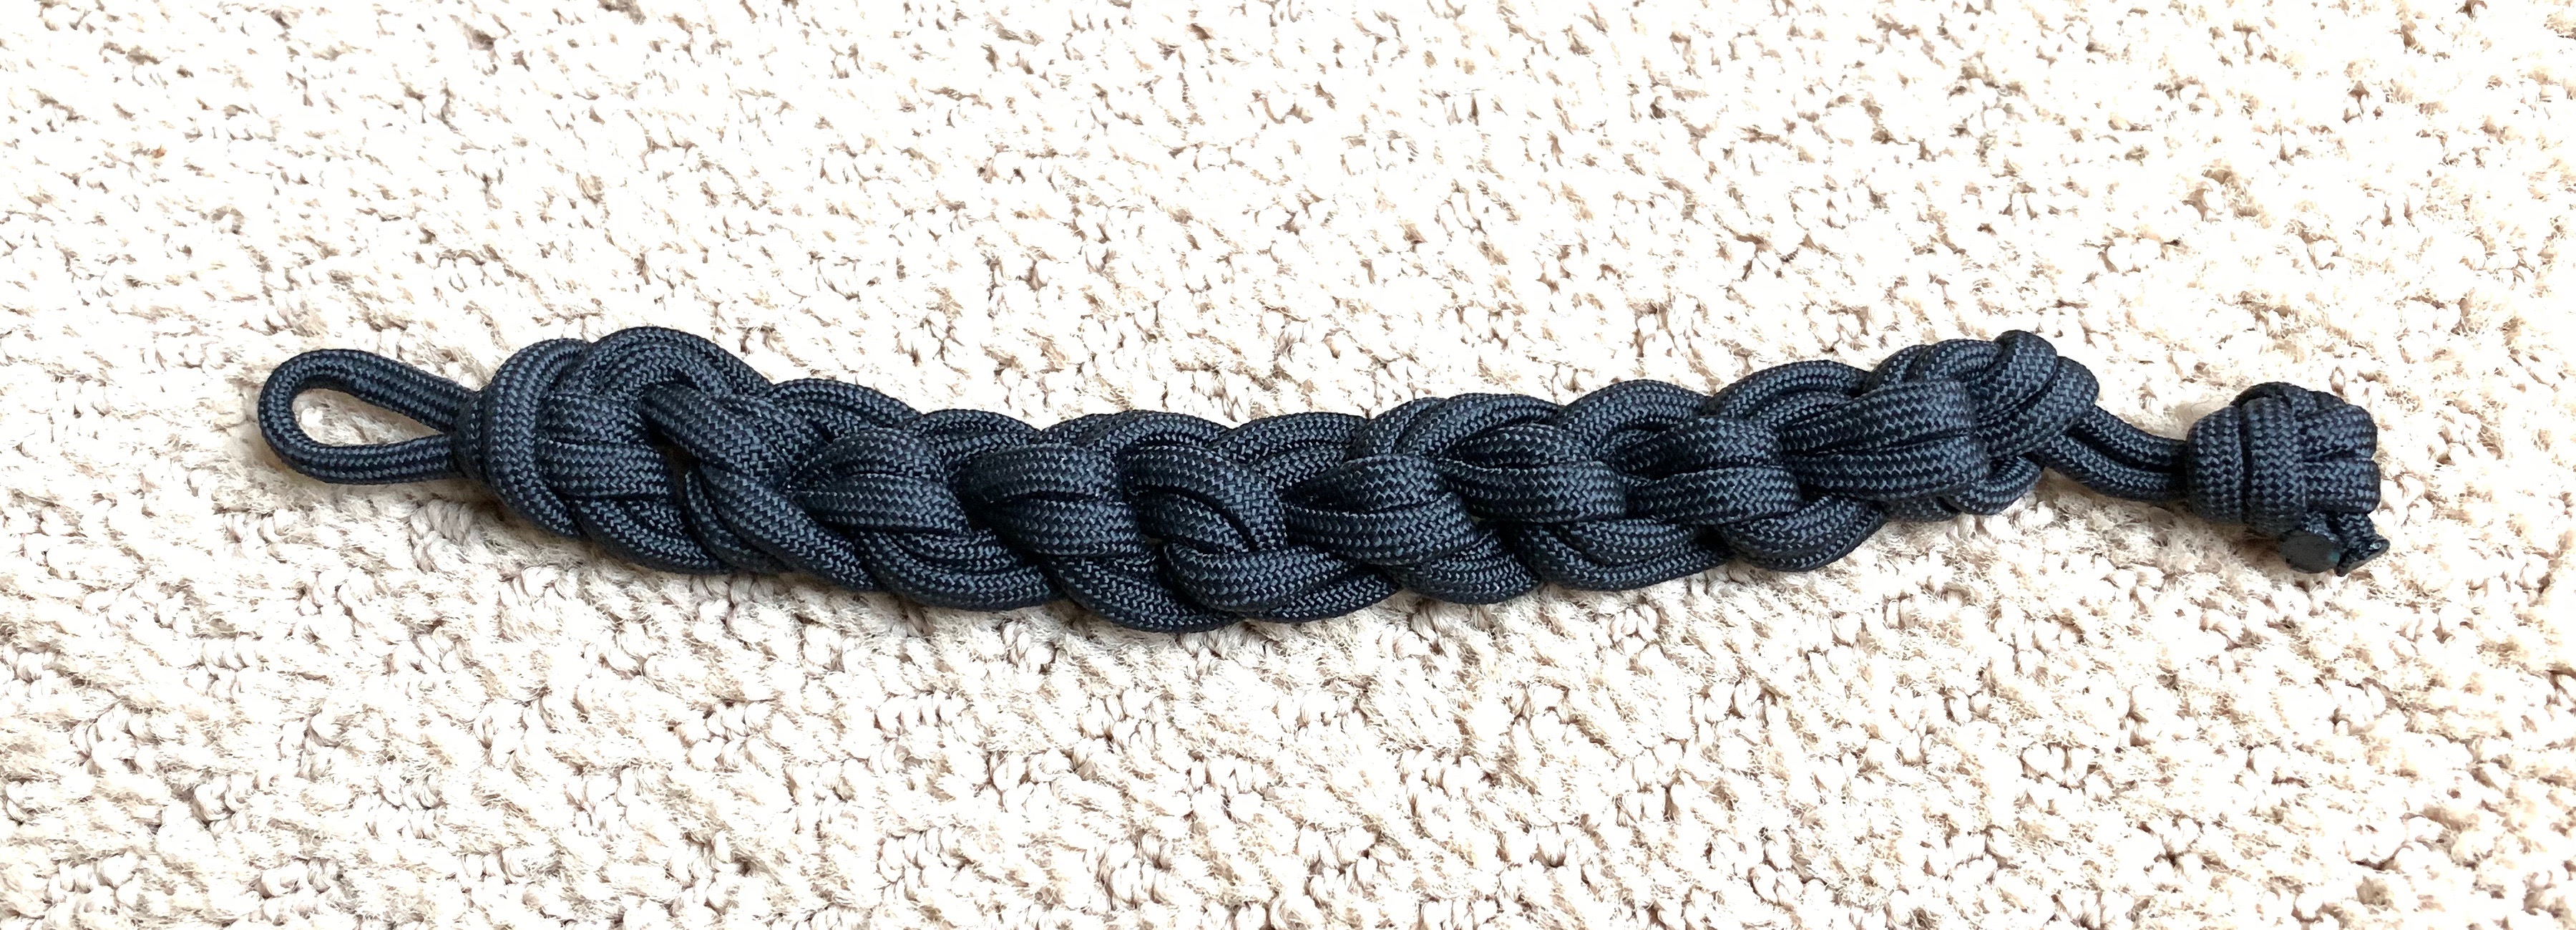 the Chive *Authentic* Paracord Bracelet expands to 7 feet 